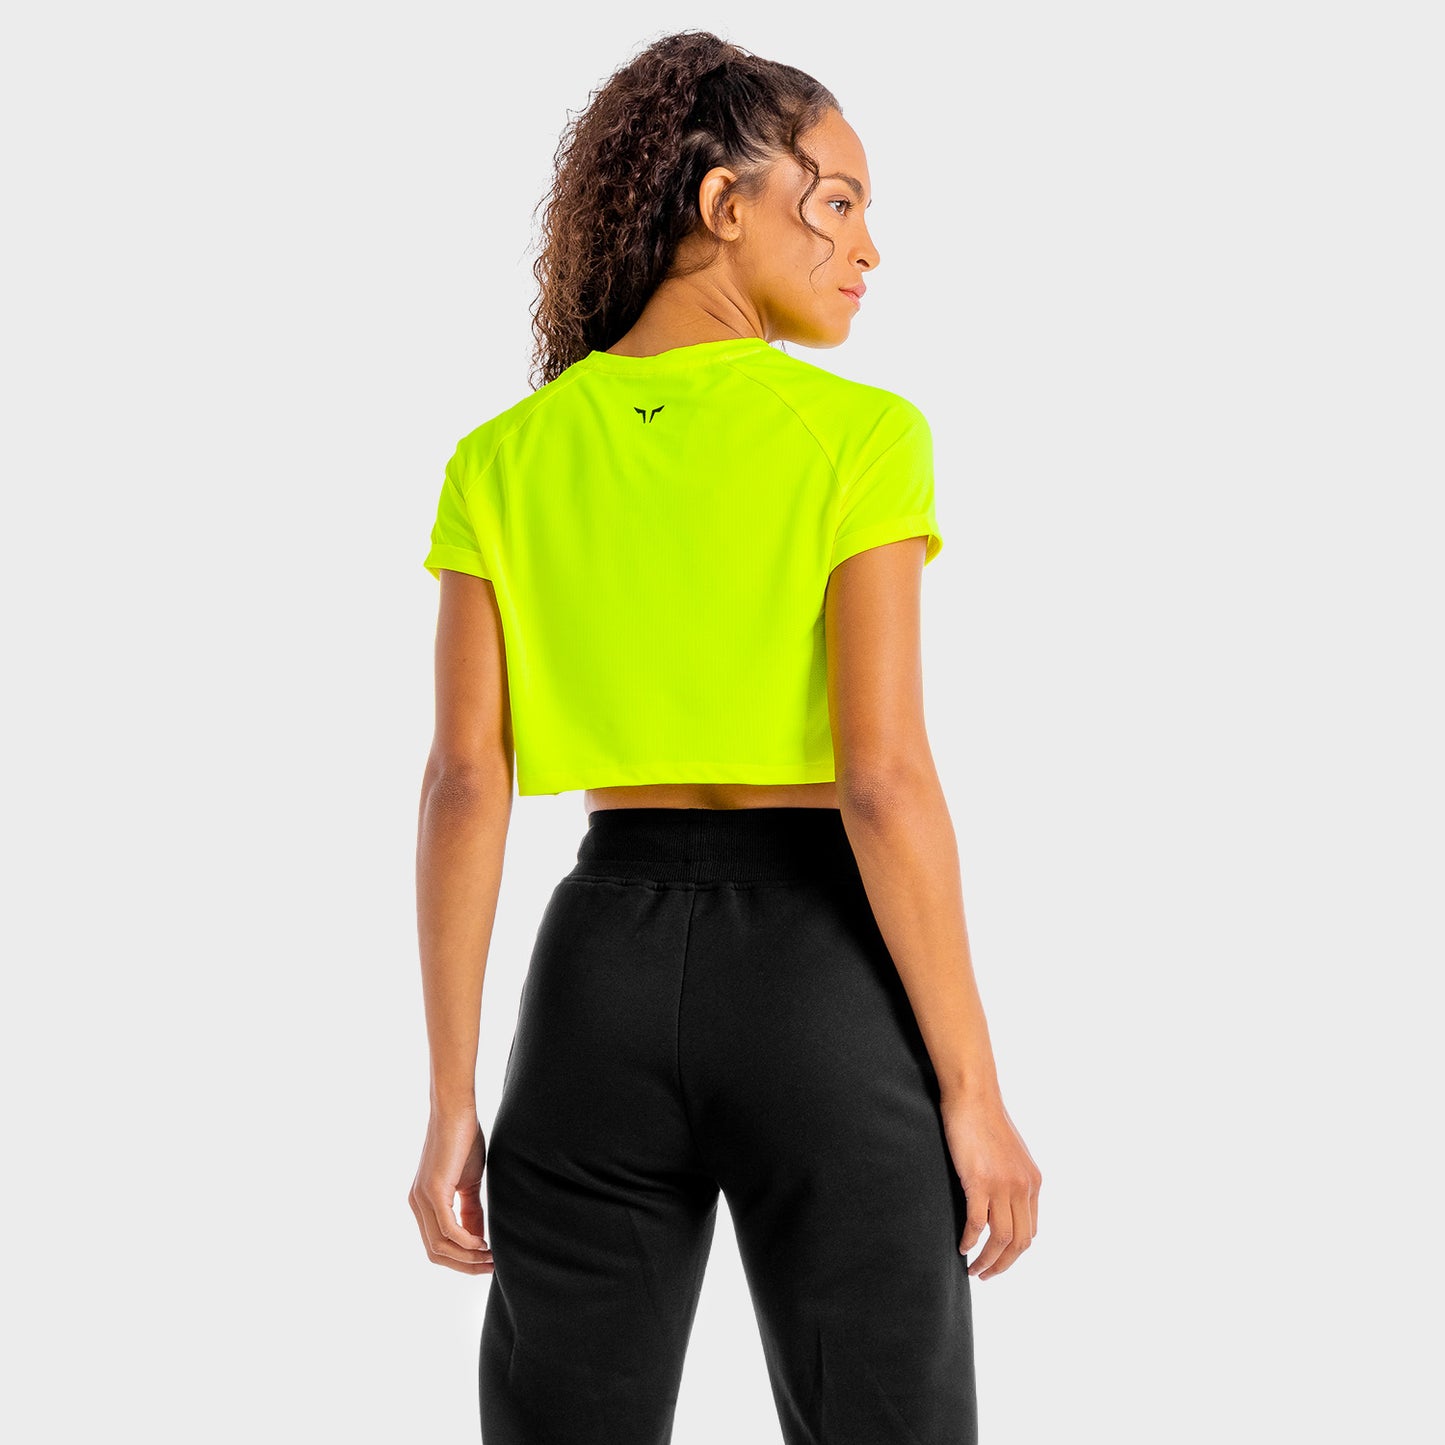 squatwolf-gym-t-shirts-for-women-core-crop-tee-neon-workout-clothes